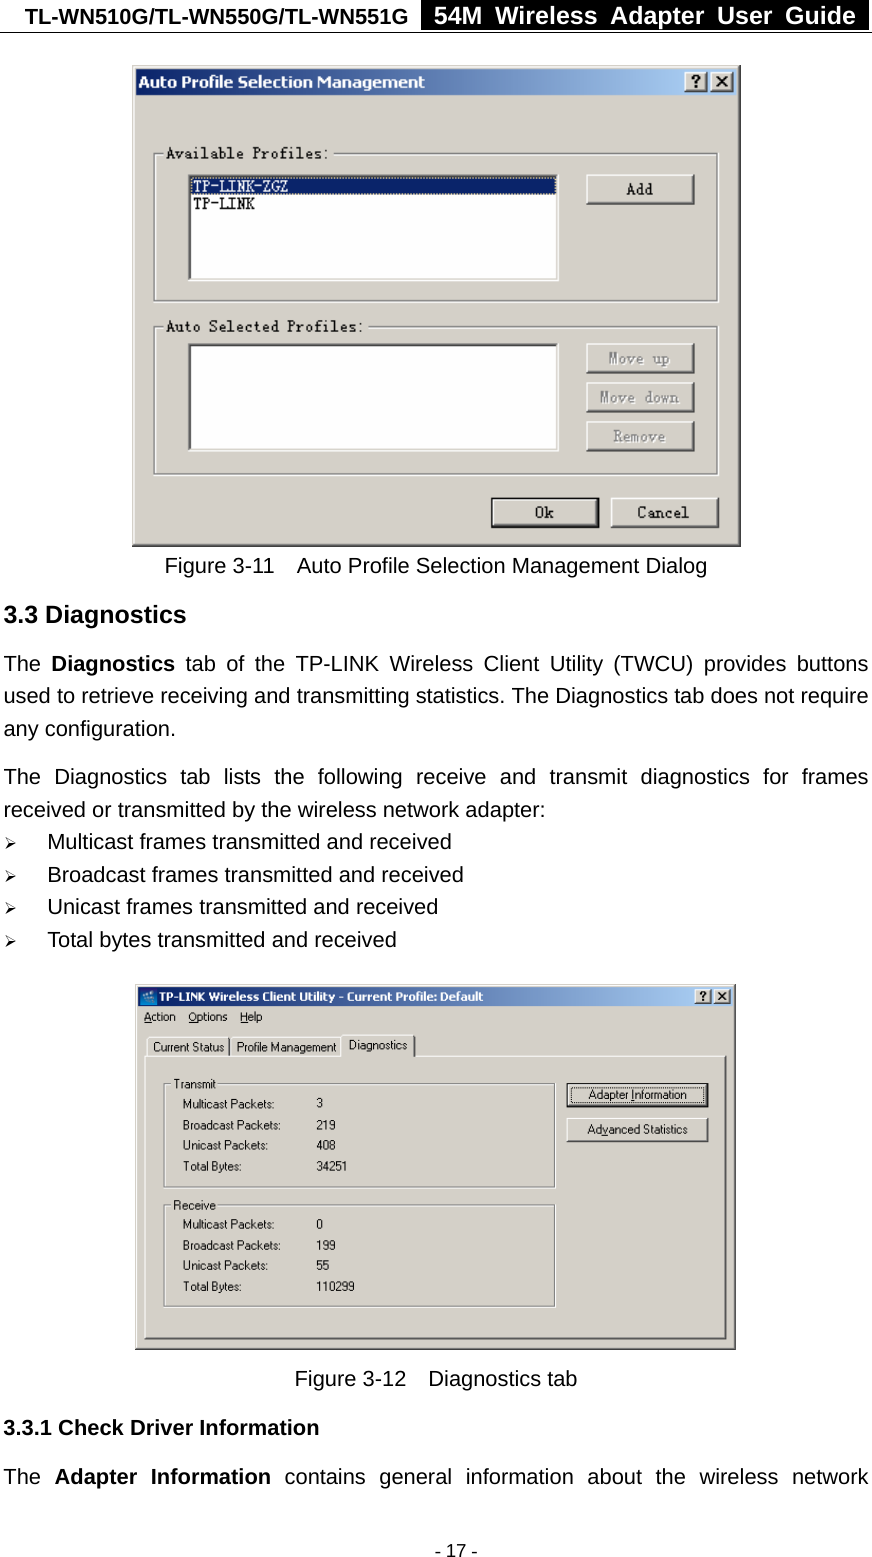 TL-WN510G/TL-WN550G/TL-WN551G  54M Wireless Adapter User Guide   Figure 3-11    Auto Profile Selection Management Dialog 3.3 Diagnostics The  Diagnostics tab of the TP-LINK Wireless Client Utility (TWCU) provides buttons used to retrieve receiving and transmitting statistics. The Diagnostics tab does not require any configuration.   The Diagnostics tab lists the following receive and transmit diagnostics for frames received or transmitted by the wireless network adapter: ¾ Multicast frames transmitted and received   ¾ Broadcast frames transmitted and received   ¾ Unicast frames transmitted and received   ¾ Total bytes transmitted and received  Figure 3-12  Diagnostics tab 3.3.1 Check Driver Information The  Adapter Information contains general information about the wireless network  - 17 -